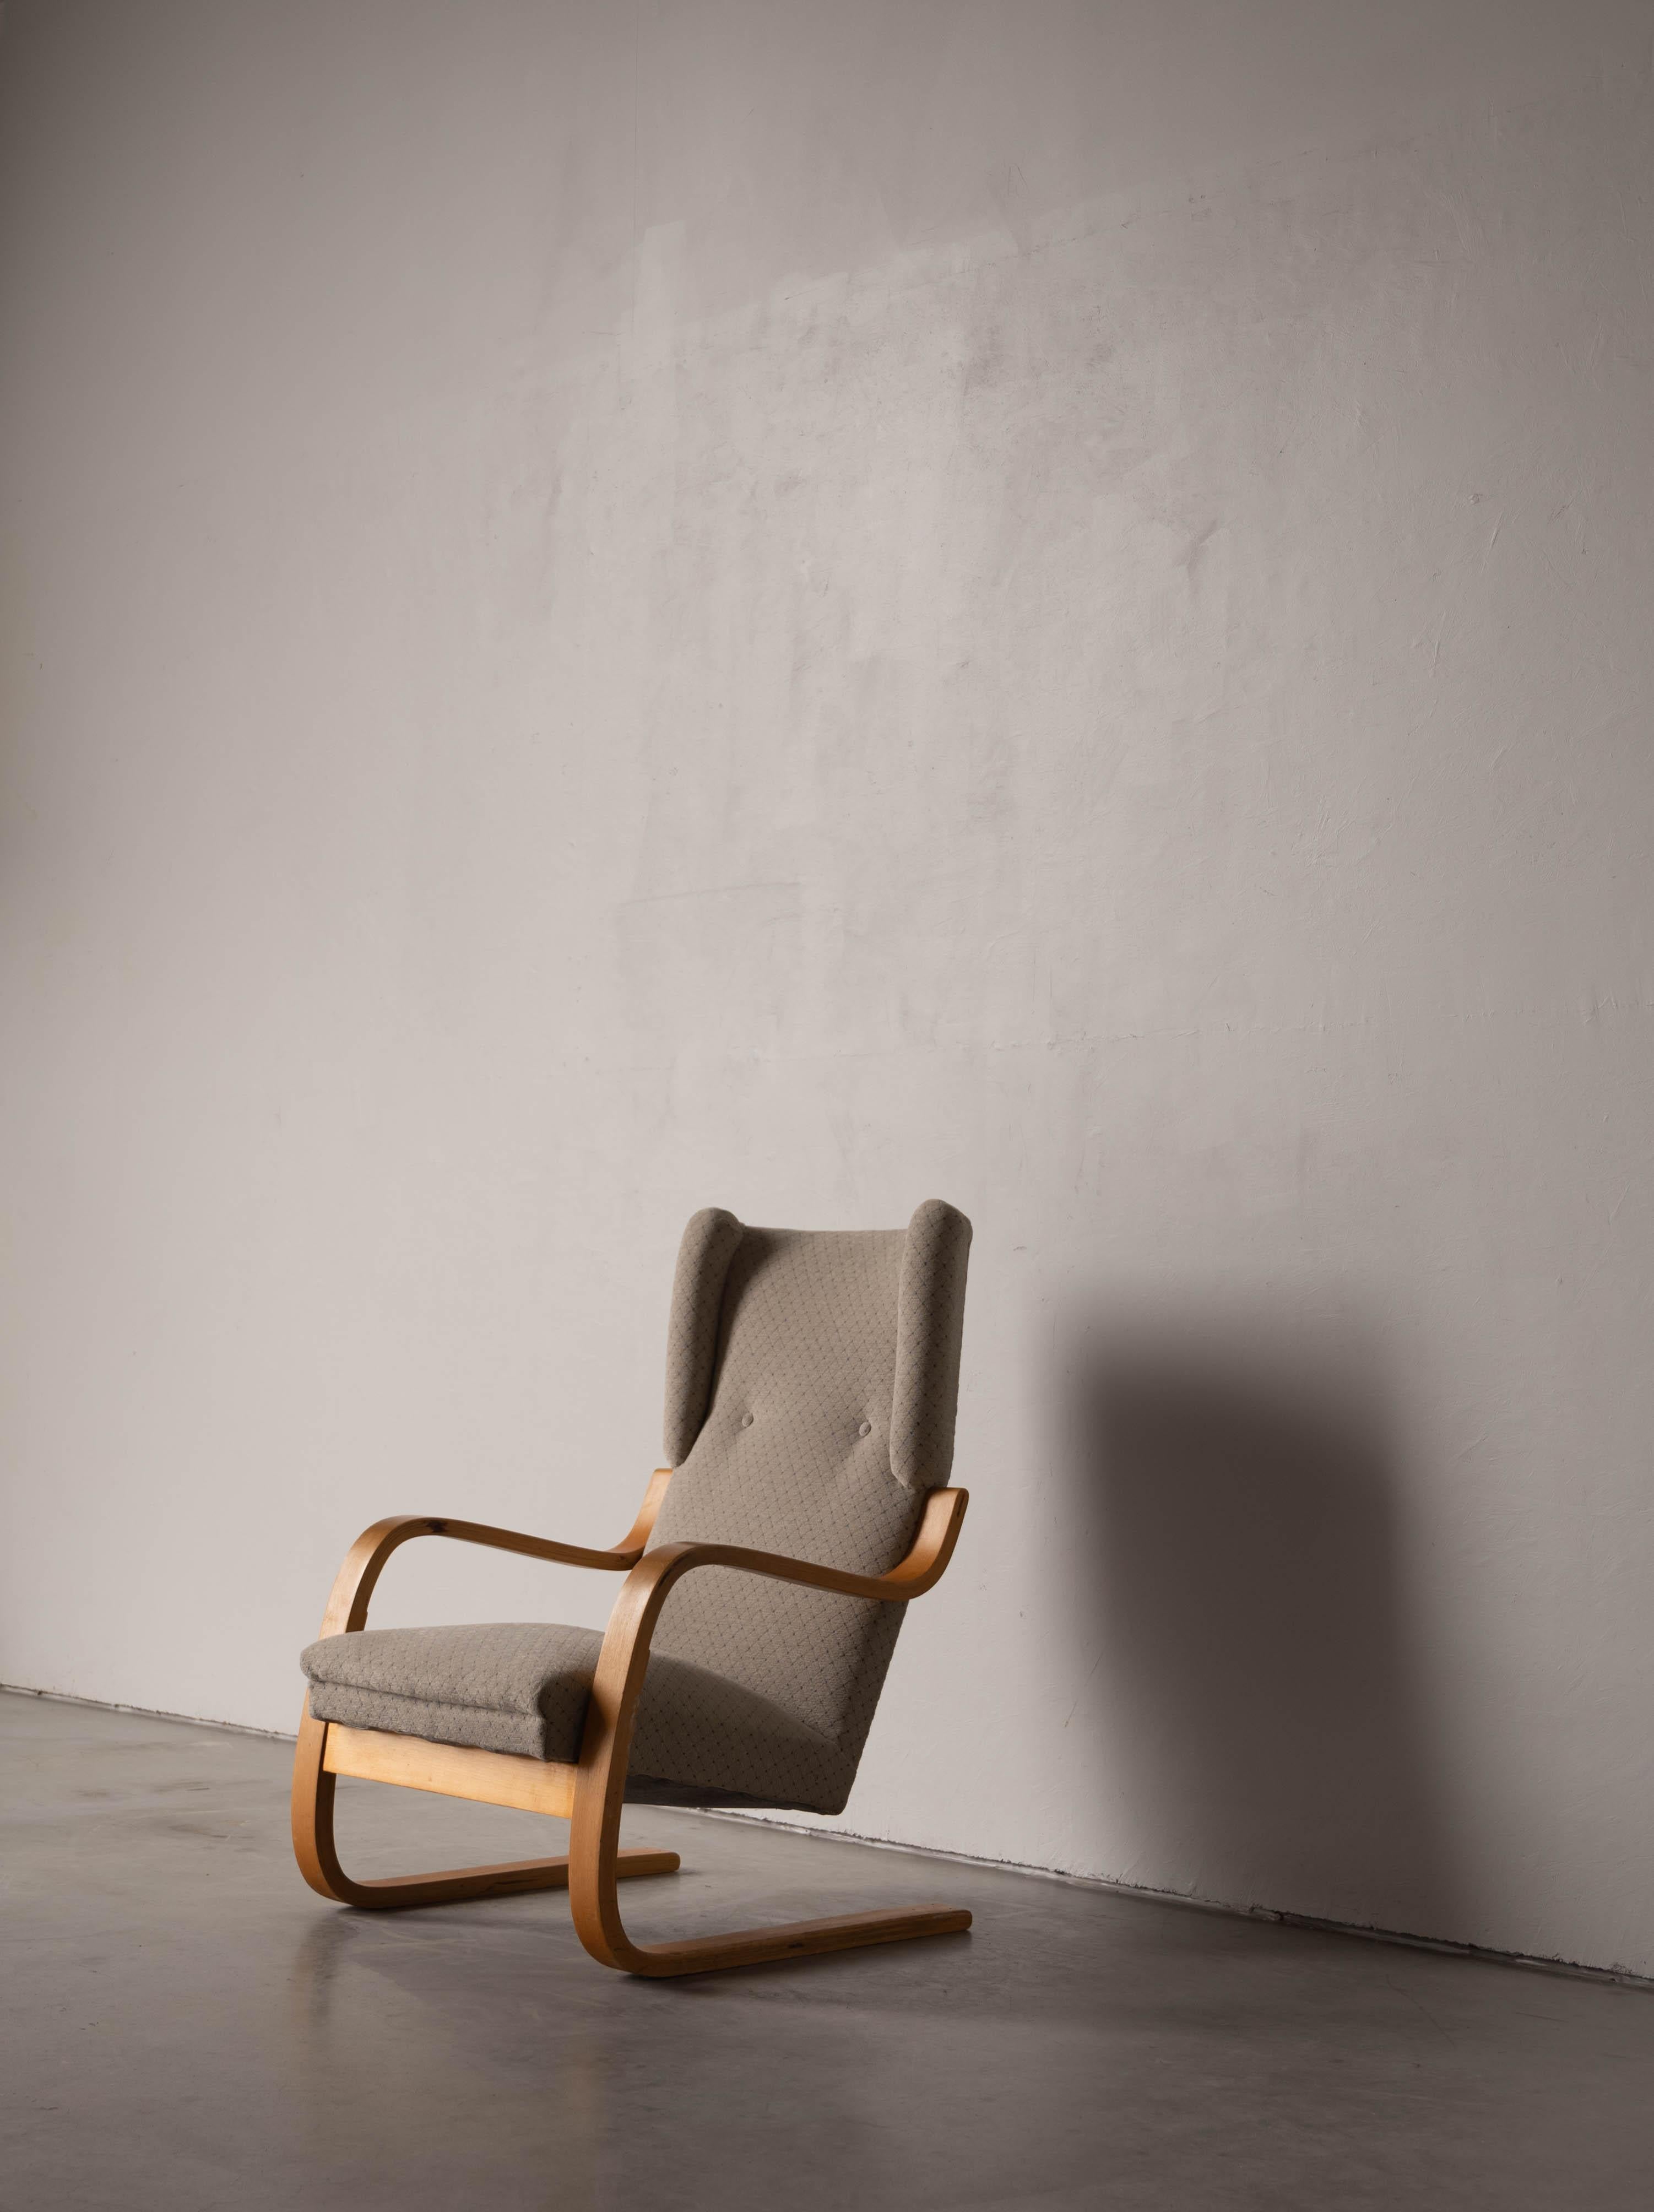 A birch and fabric lounge chair designed by Alvar Aalto and produced by Artek, Finland, c. 1970s.